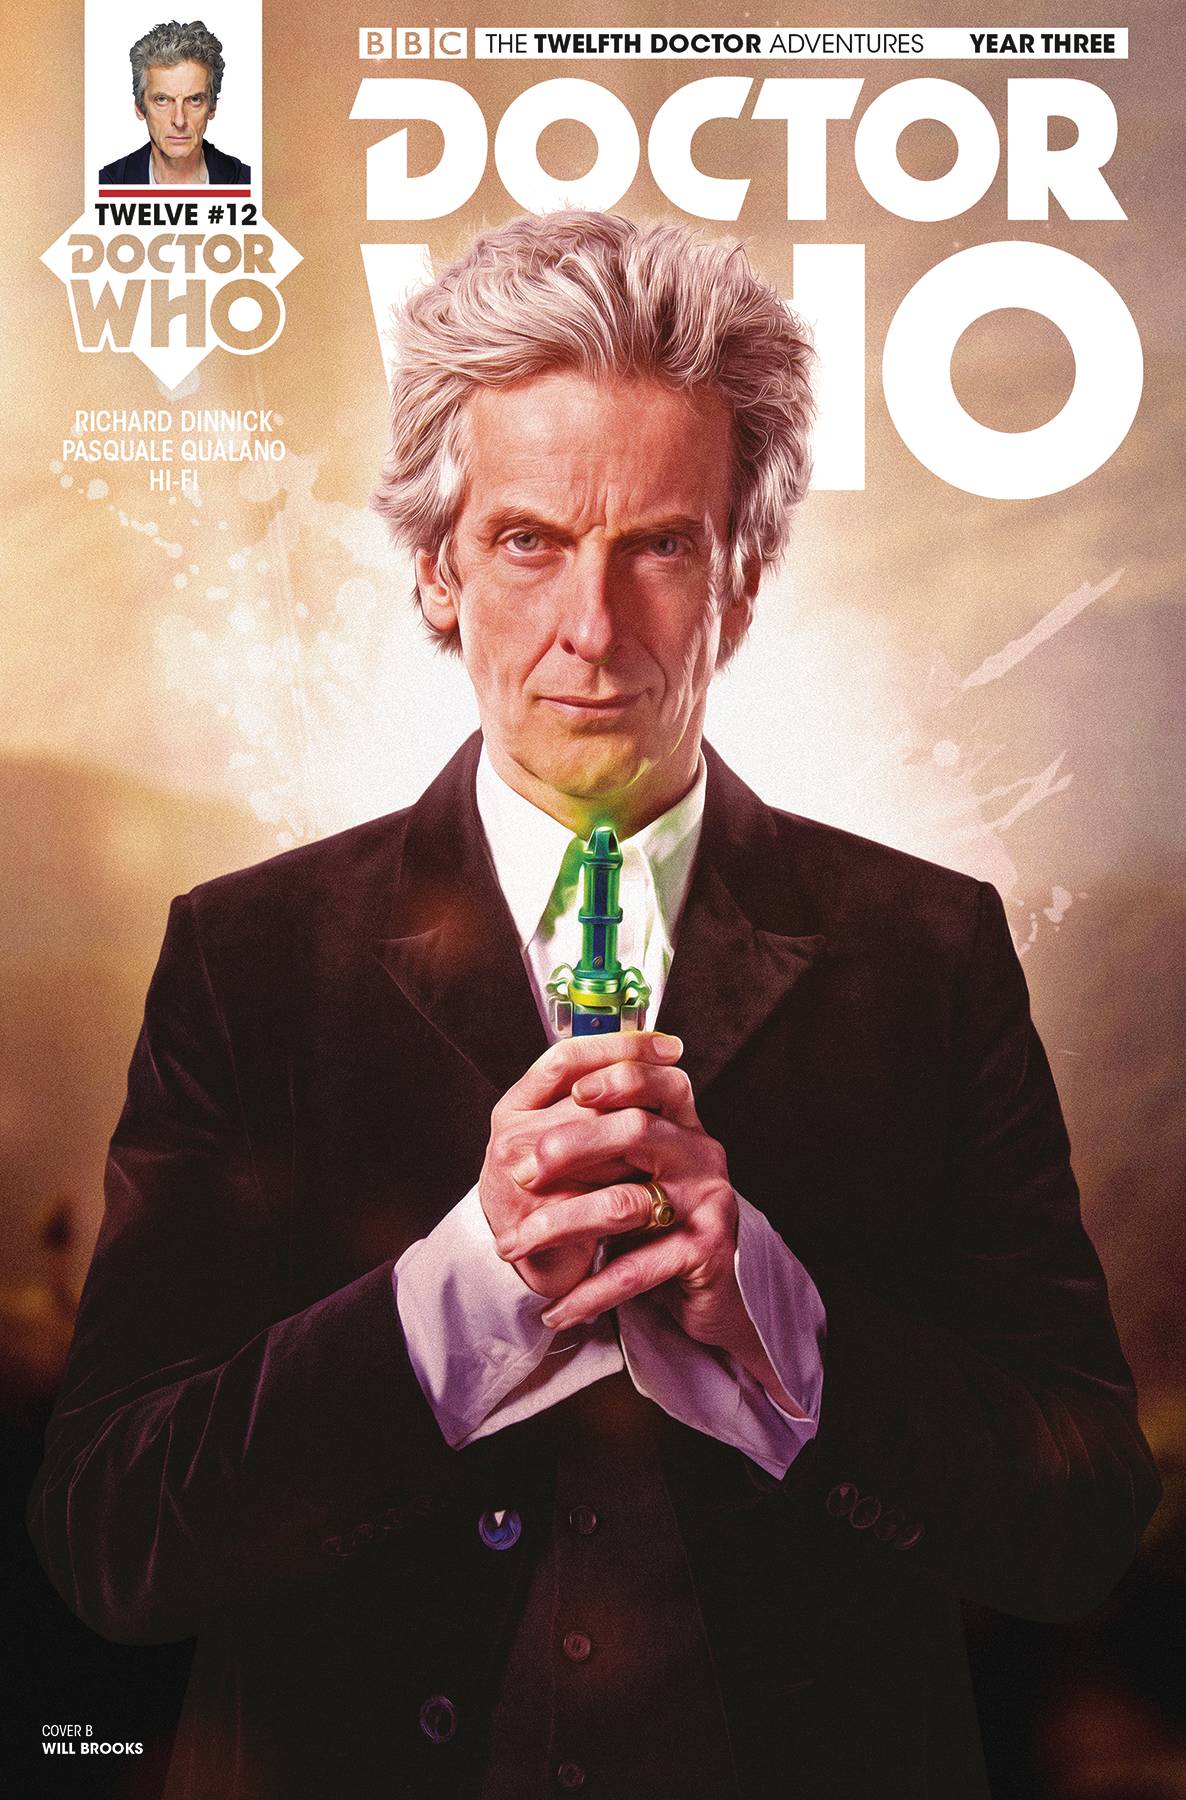 Doctor Who 12th Year Three #12 Cover B Photo